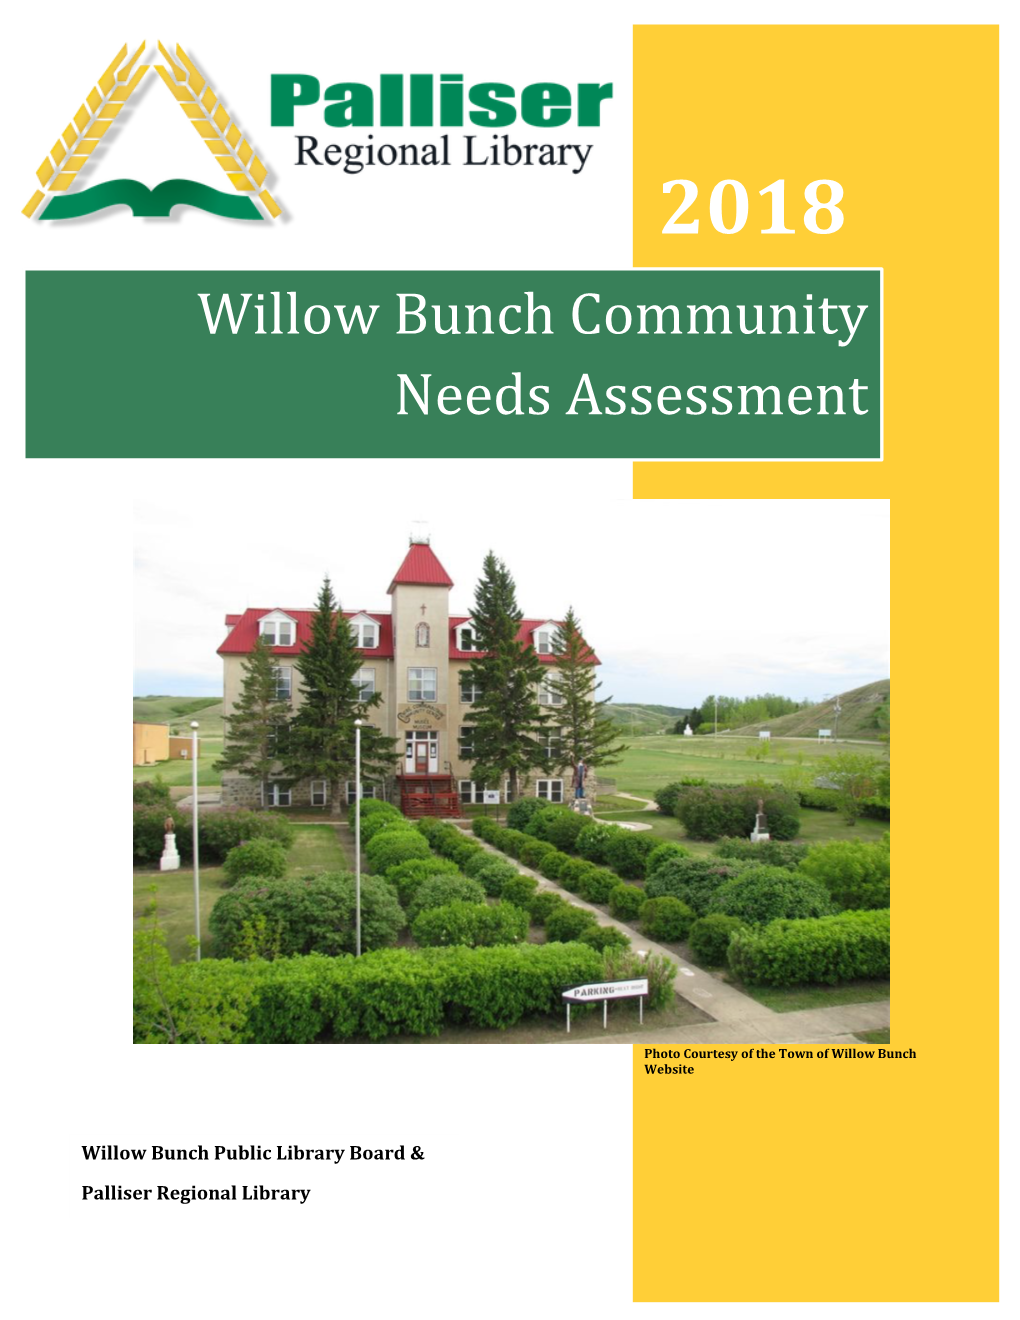 Willow Bunch Community